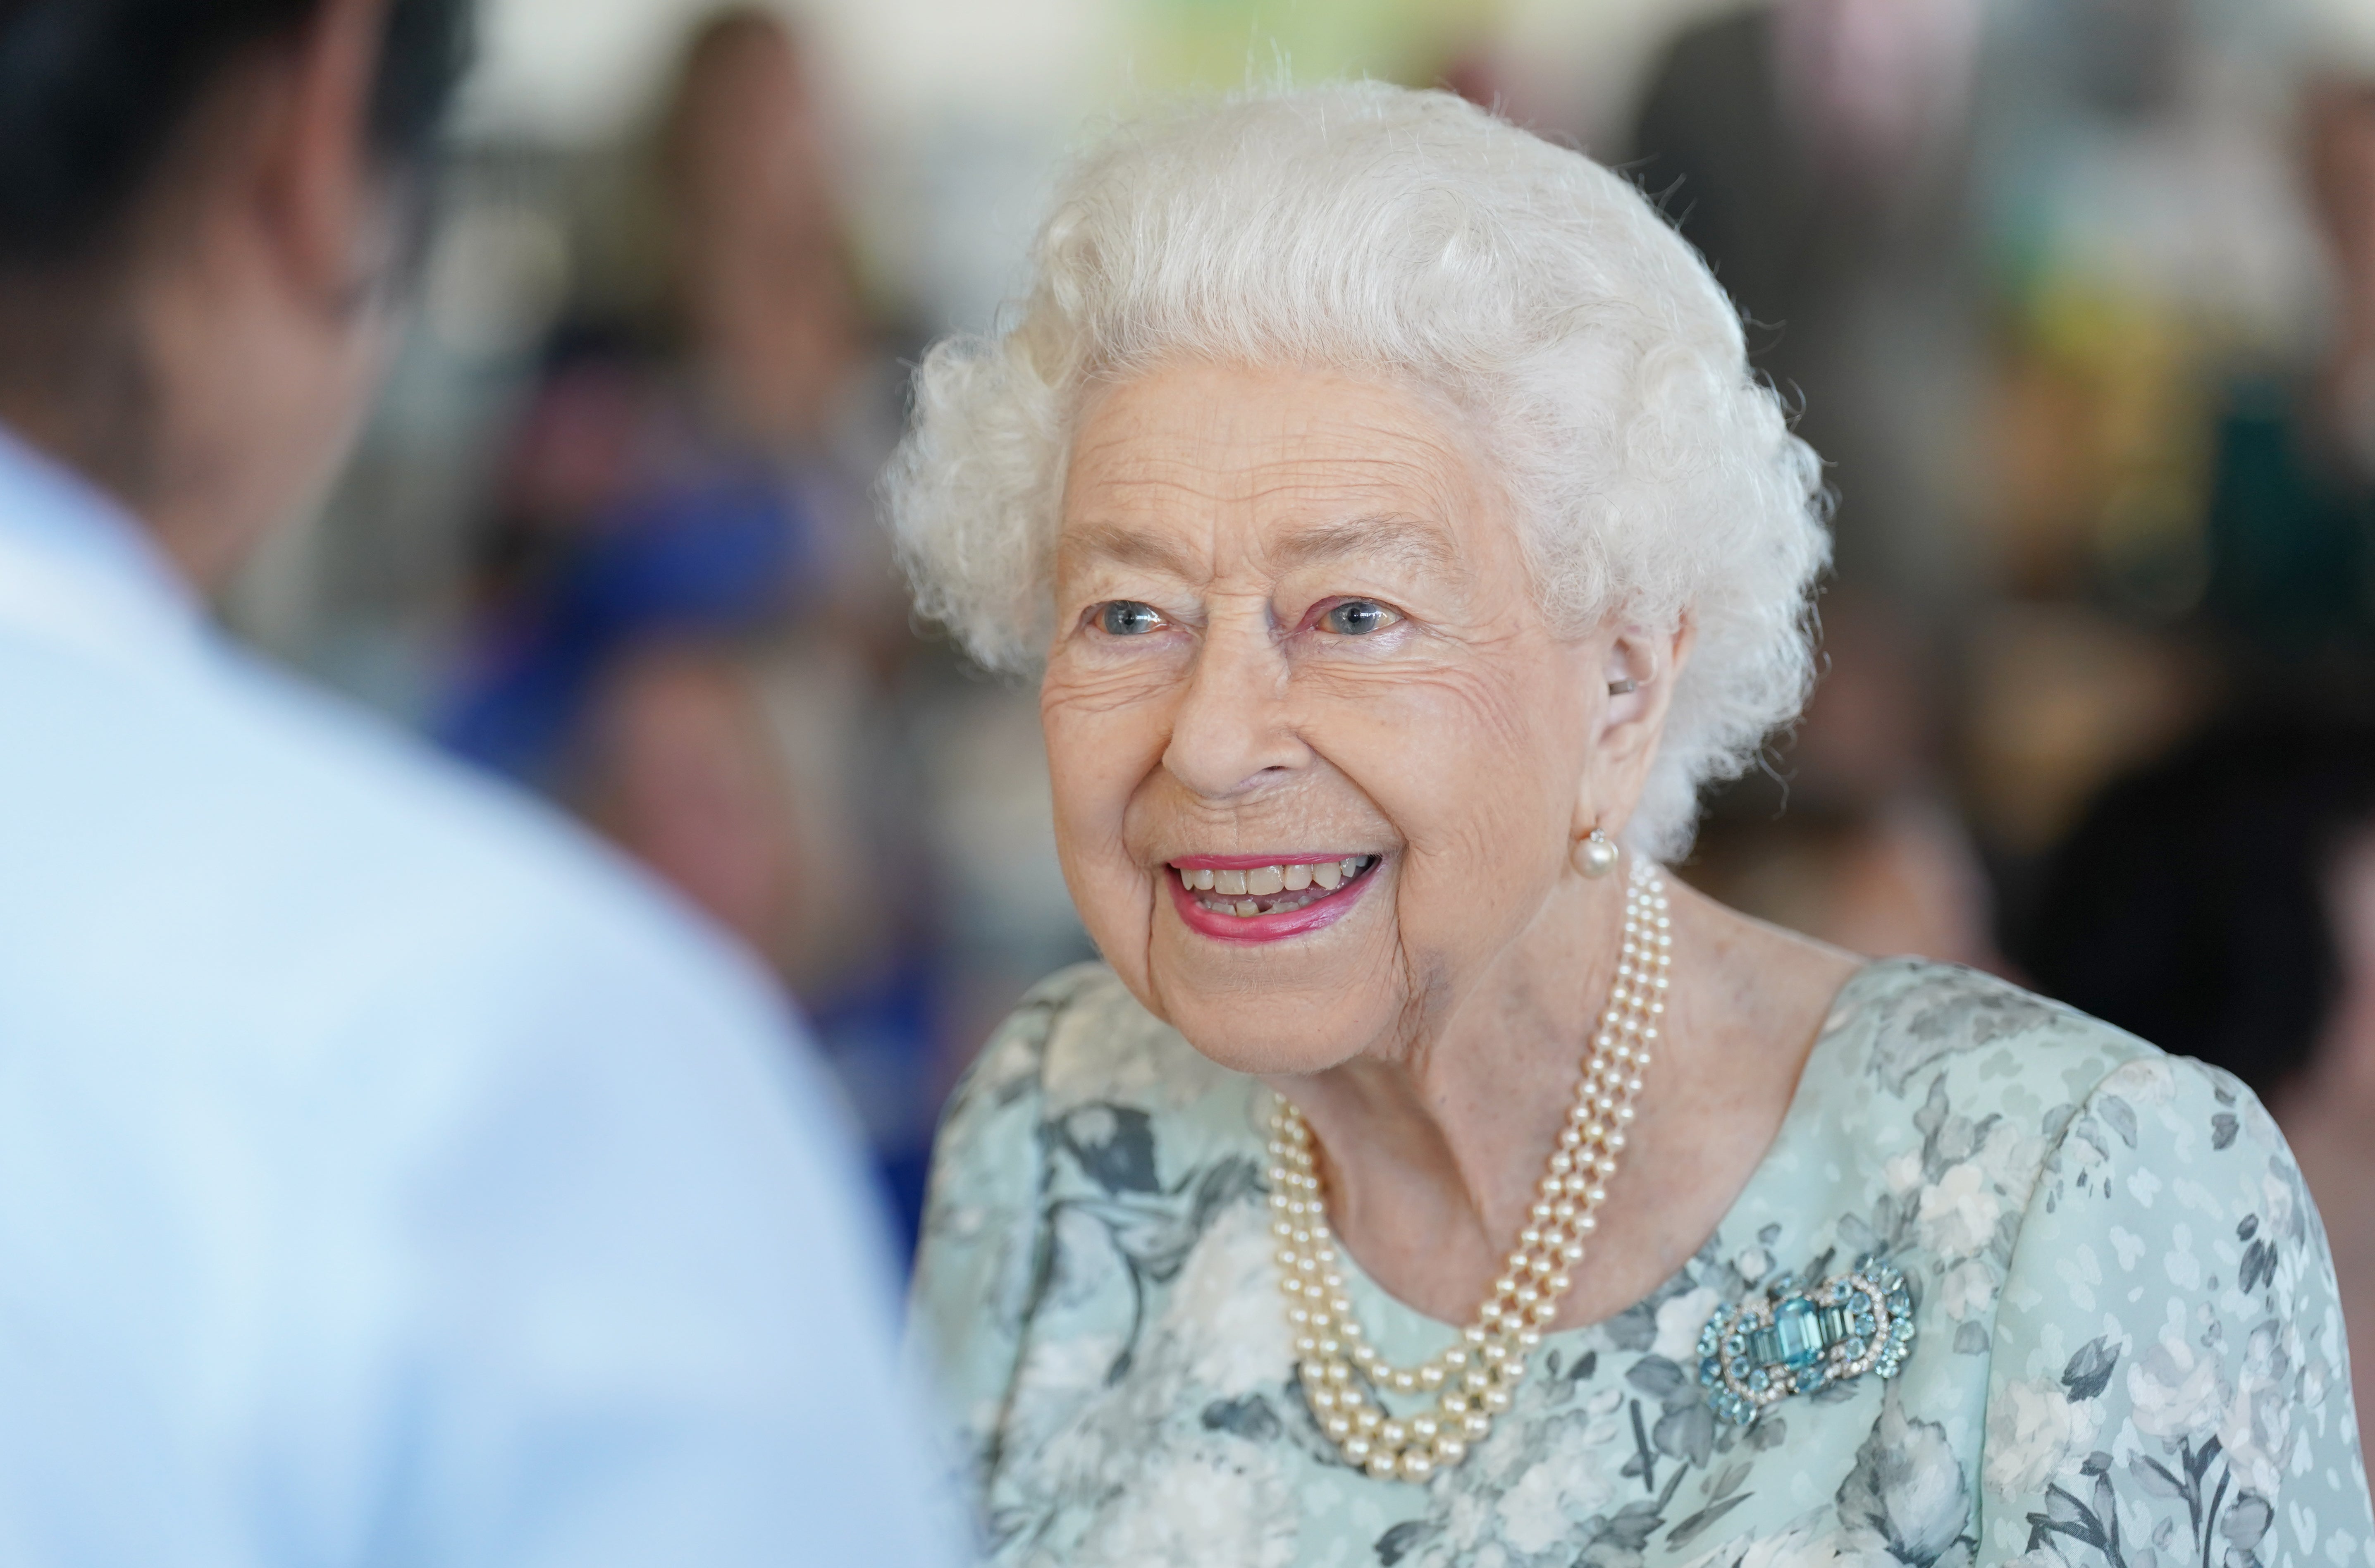 The Queen officially opened the new £22m Thames Hospice building in Maidenhead, Berkshire (Kirsty O’Connor/PA)